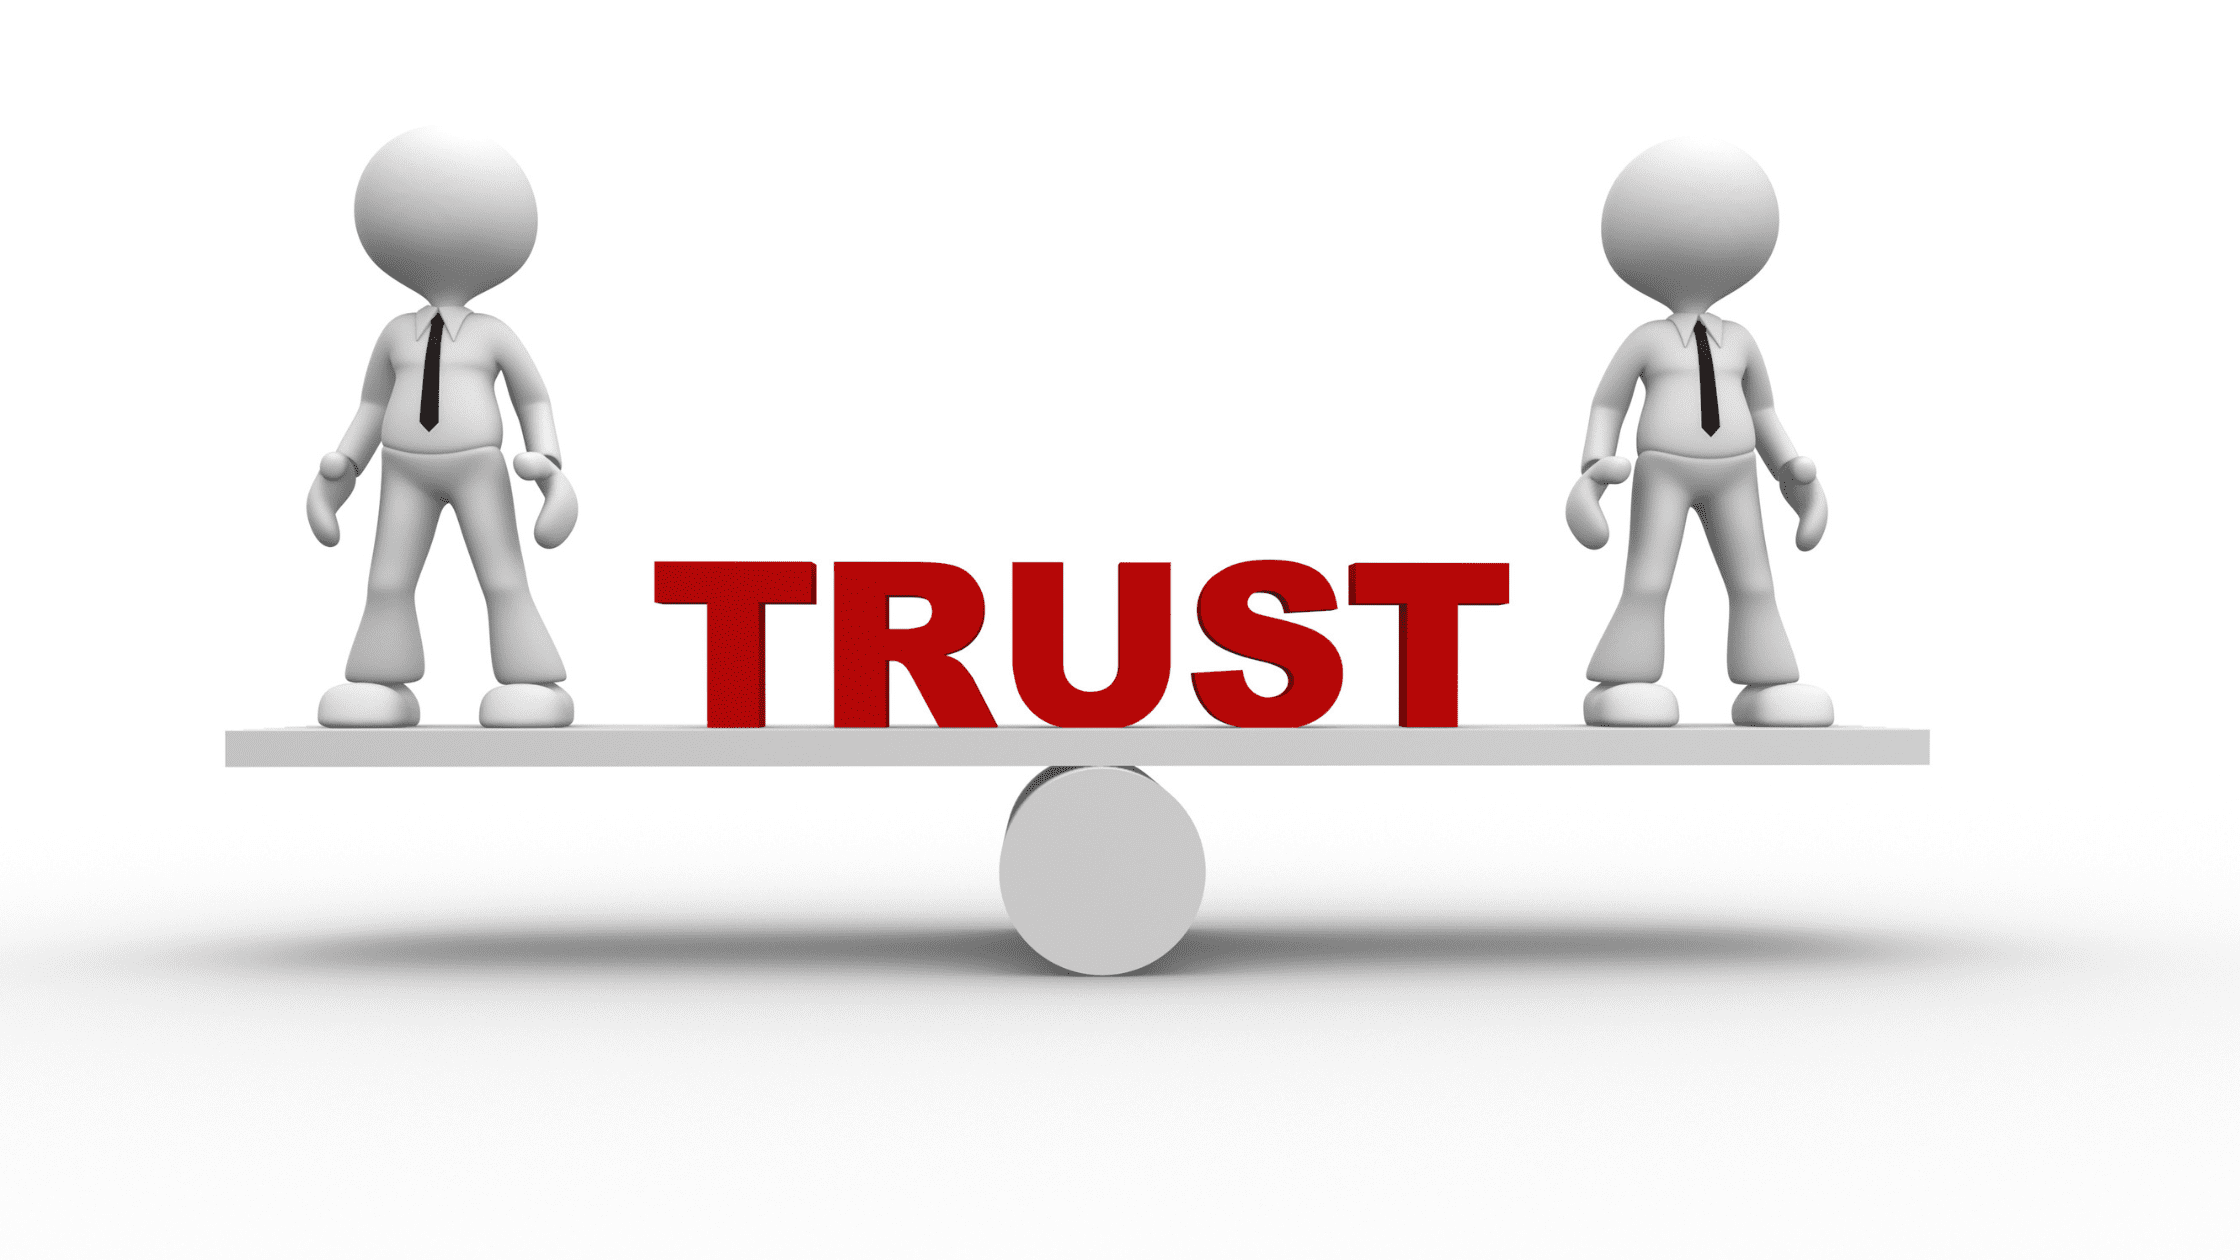 4 Things Every Leader Needs to Know About Trust